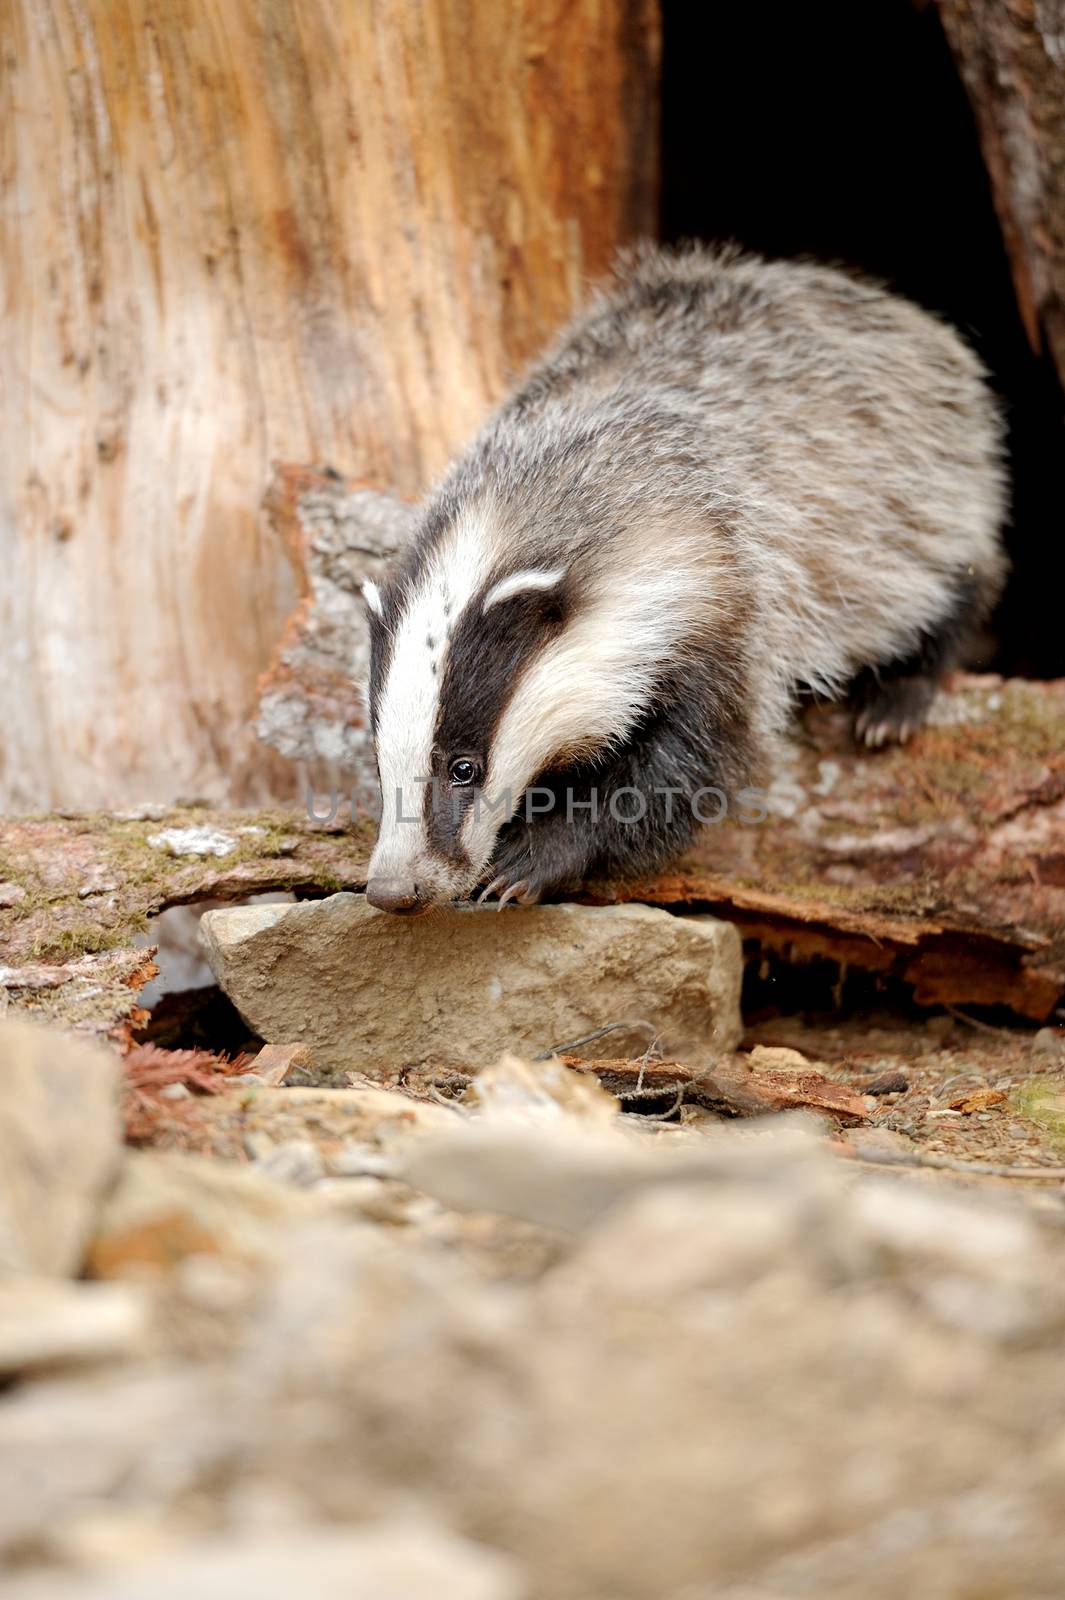 Badger near its burrow in the forest 